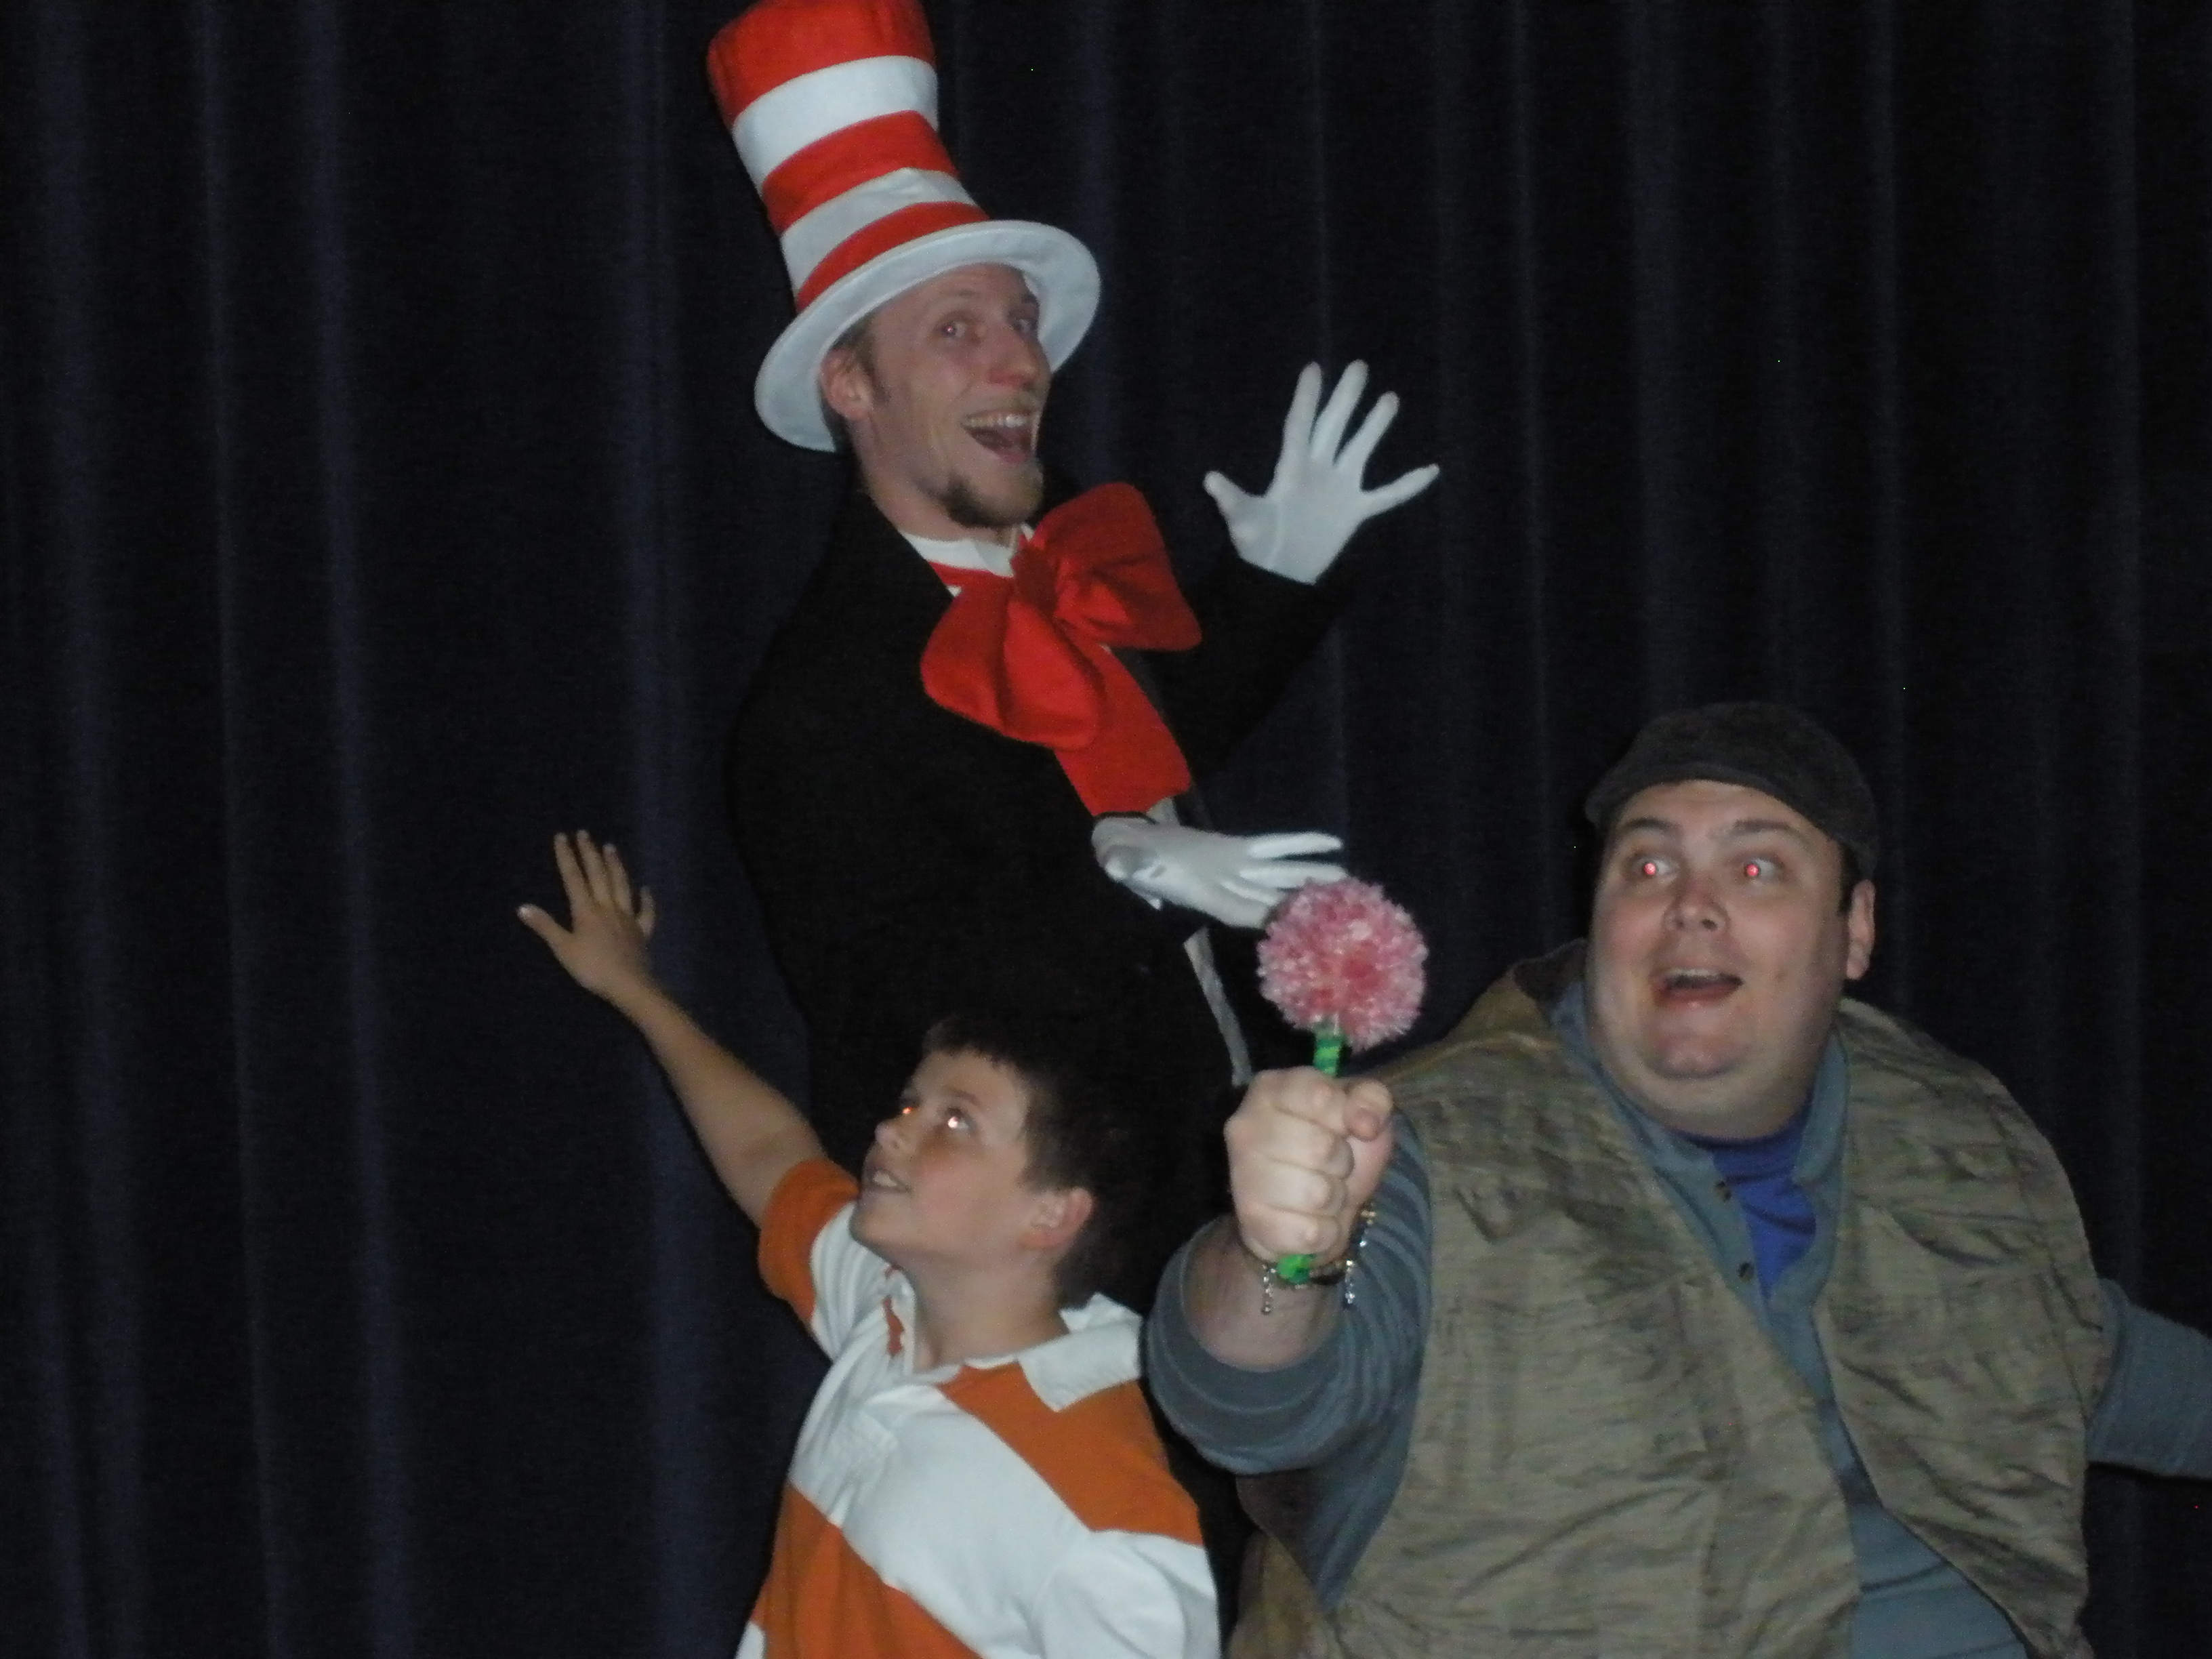 How lucky you are to see SEUSSICAL in West Jordan